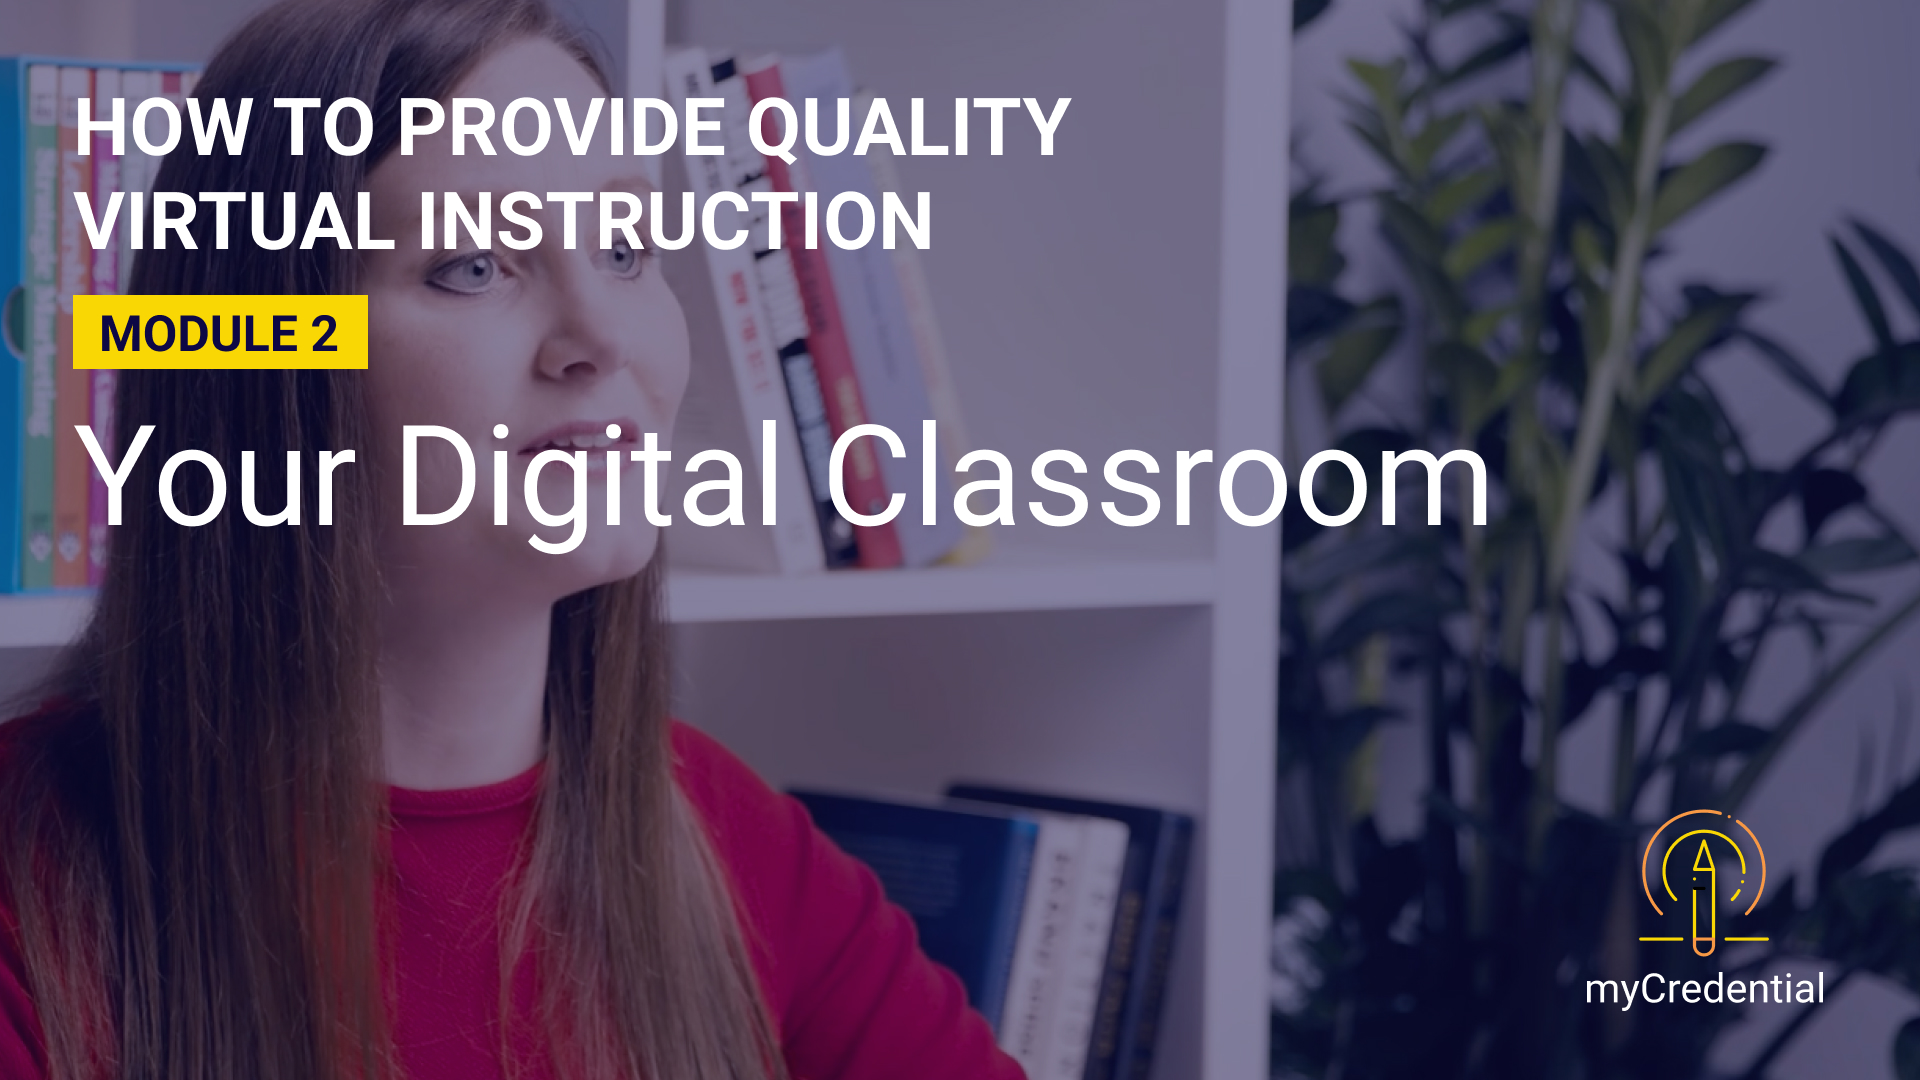 How to Provide Quality Virtual Instruction (Module 2): Your Digital Classroom